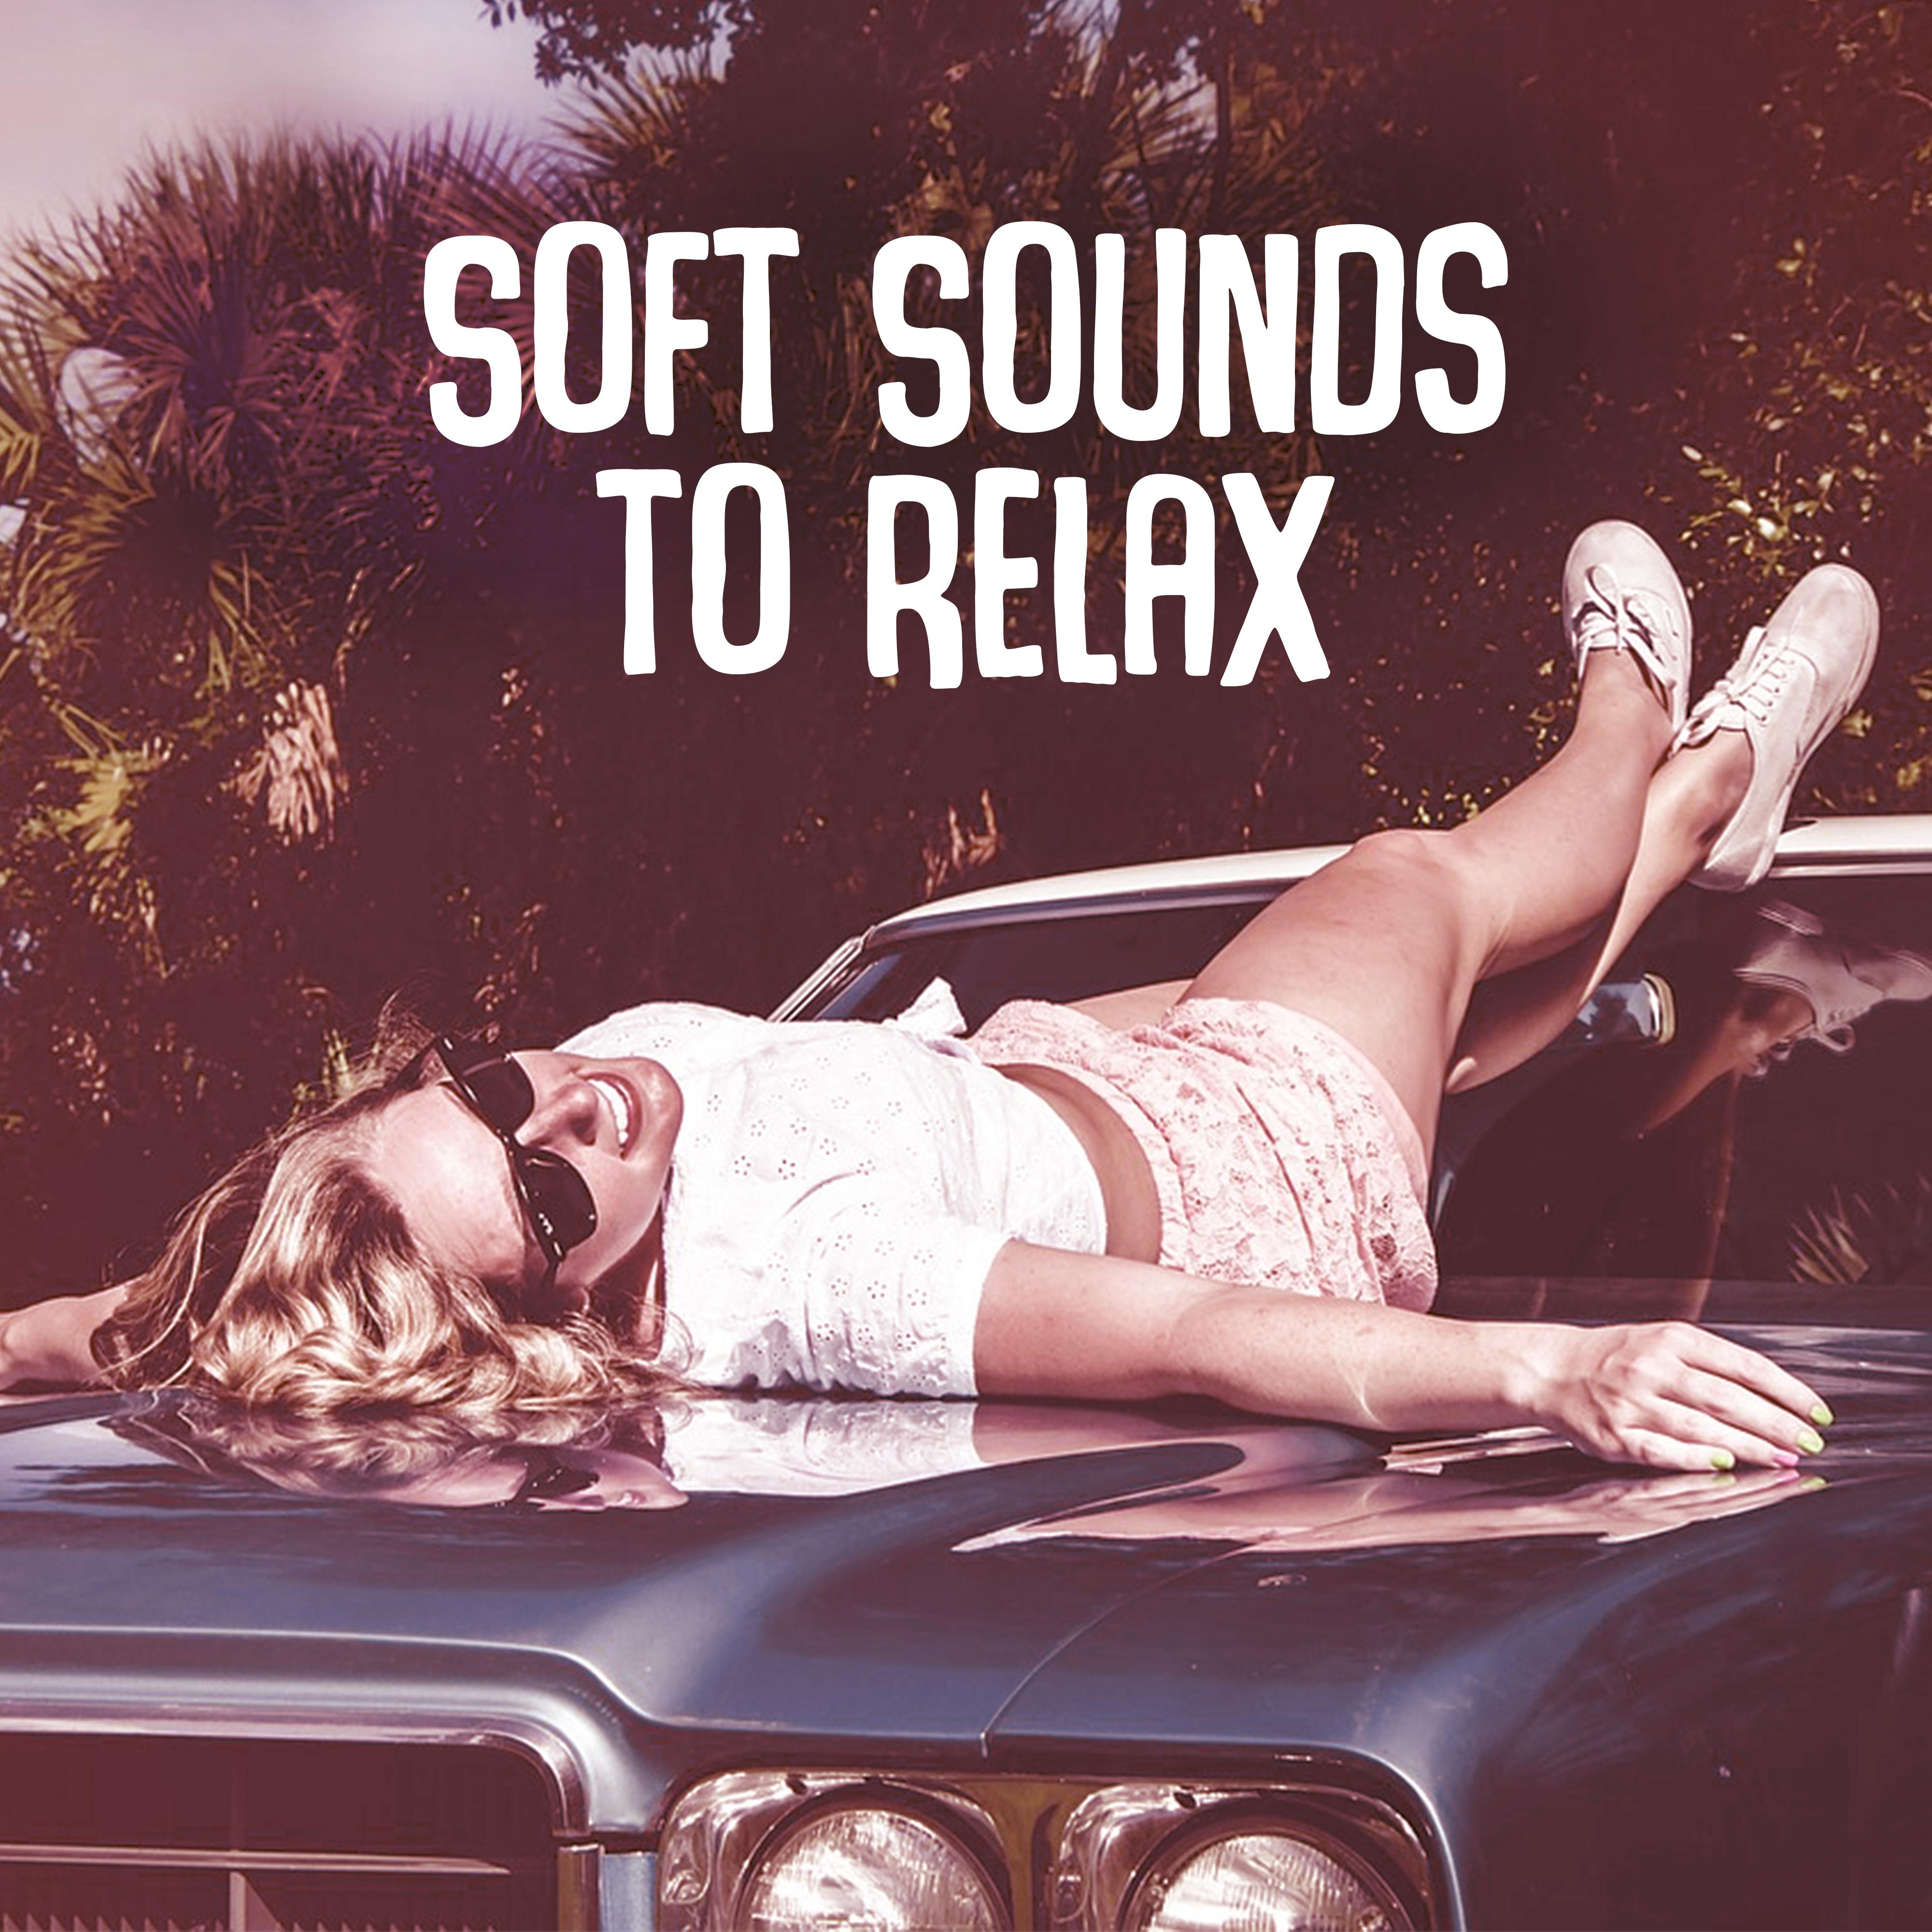 Soft Sounds to Relax – Relaxing New Age Music, Soothing Waves, Healing Sounds, Rest with Beautiful Music